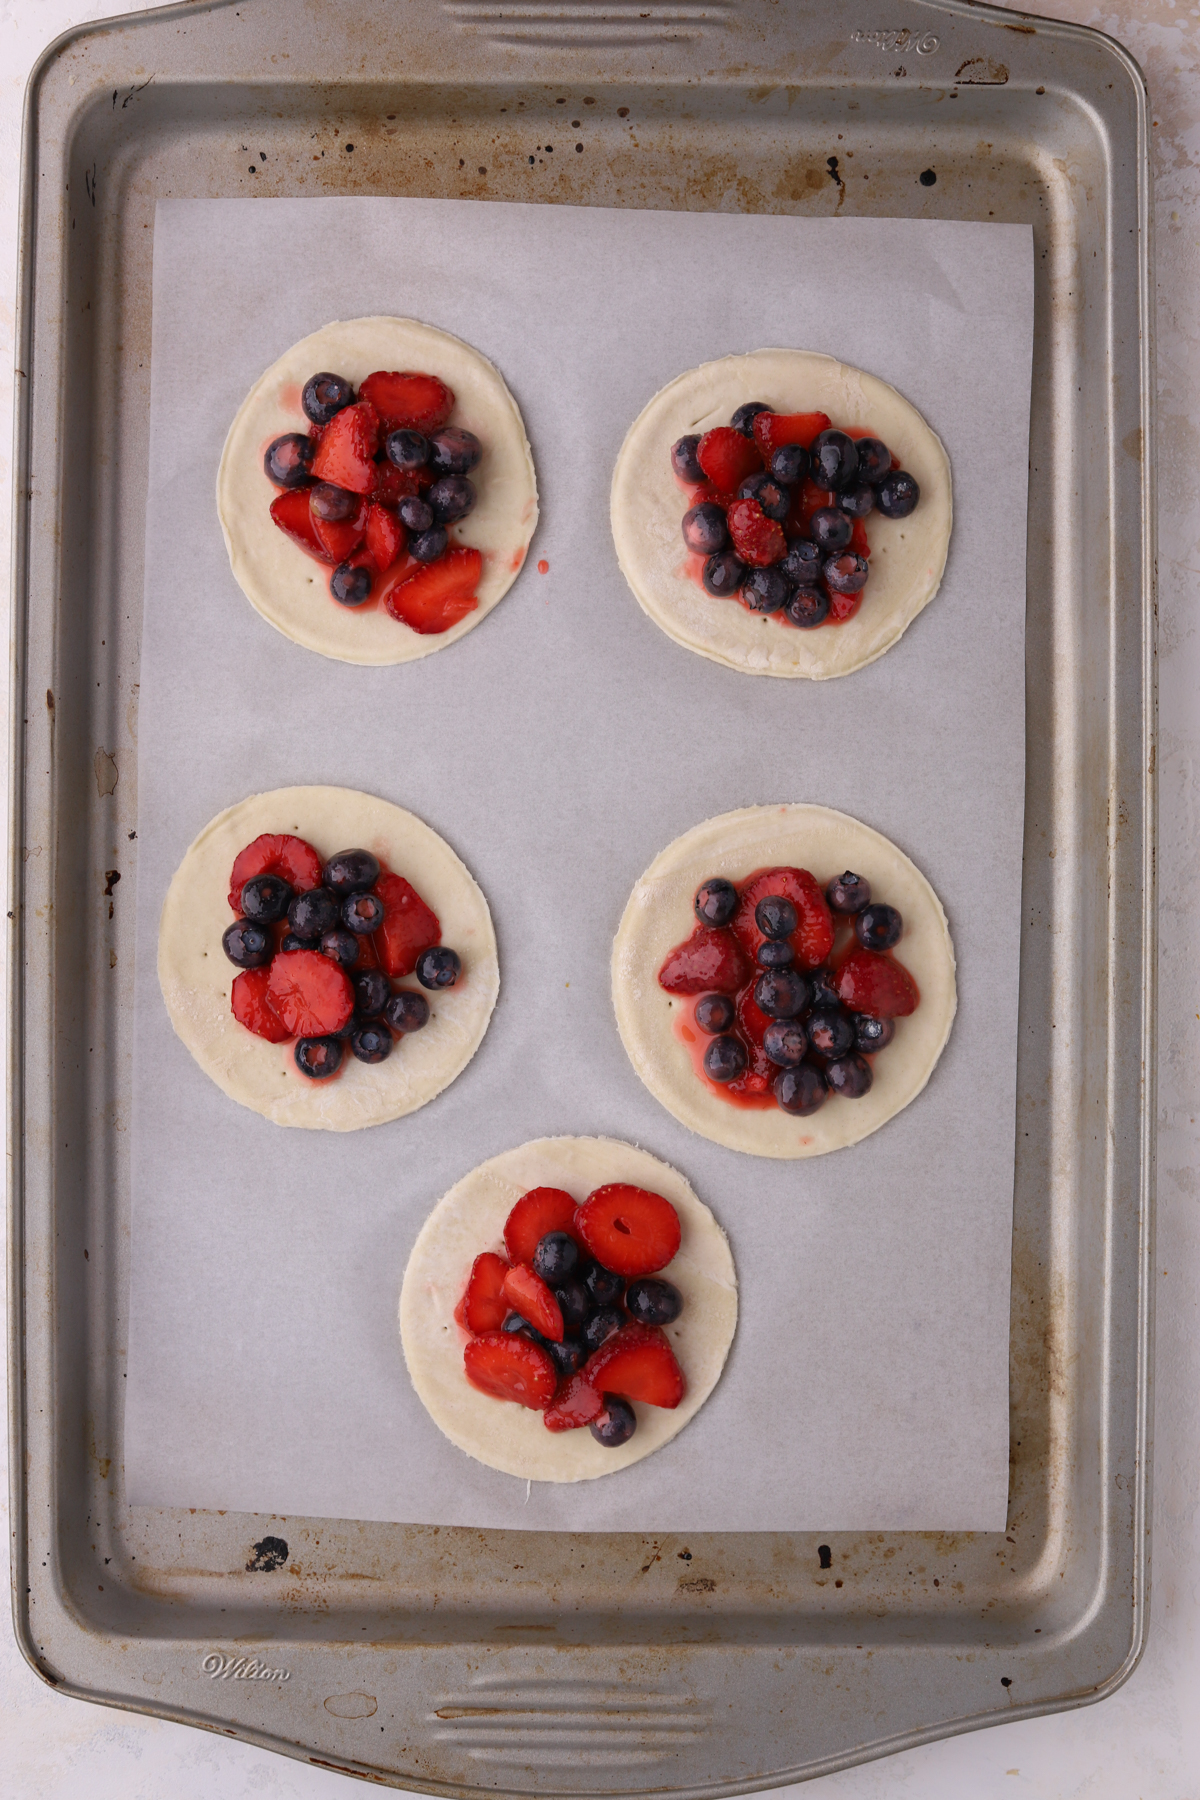 A baking tray lined with parchment paper with blueberries and strawberries on small pie crusts.